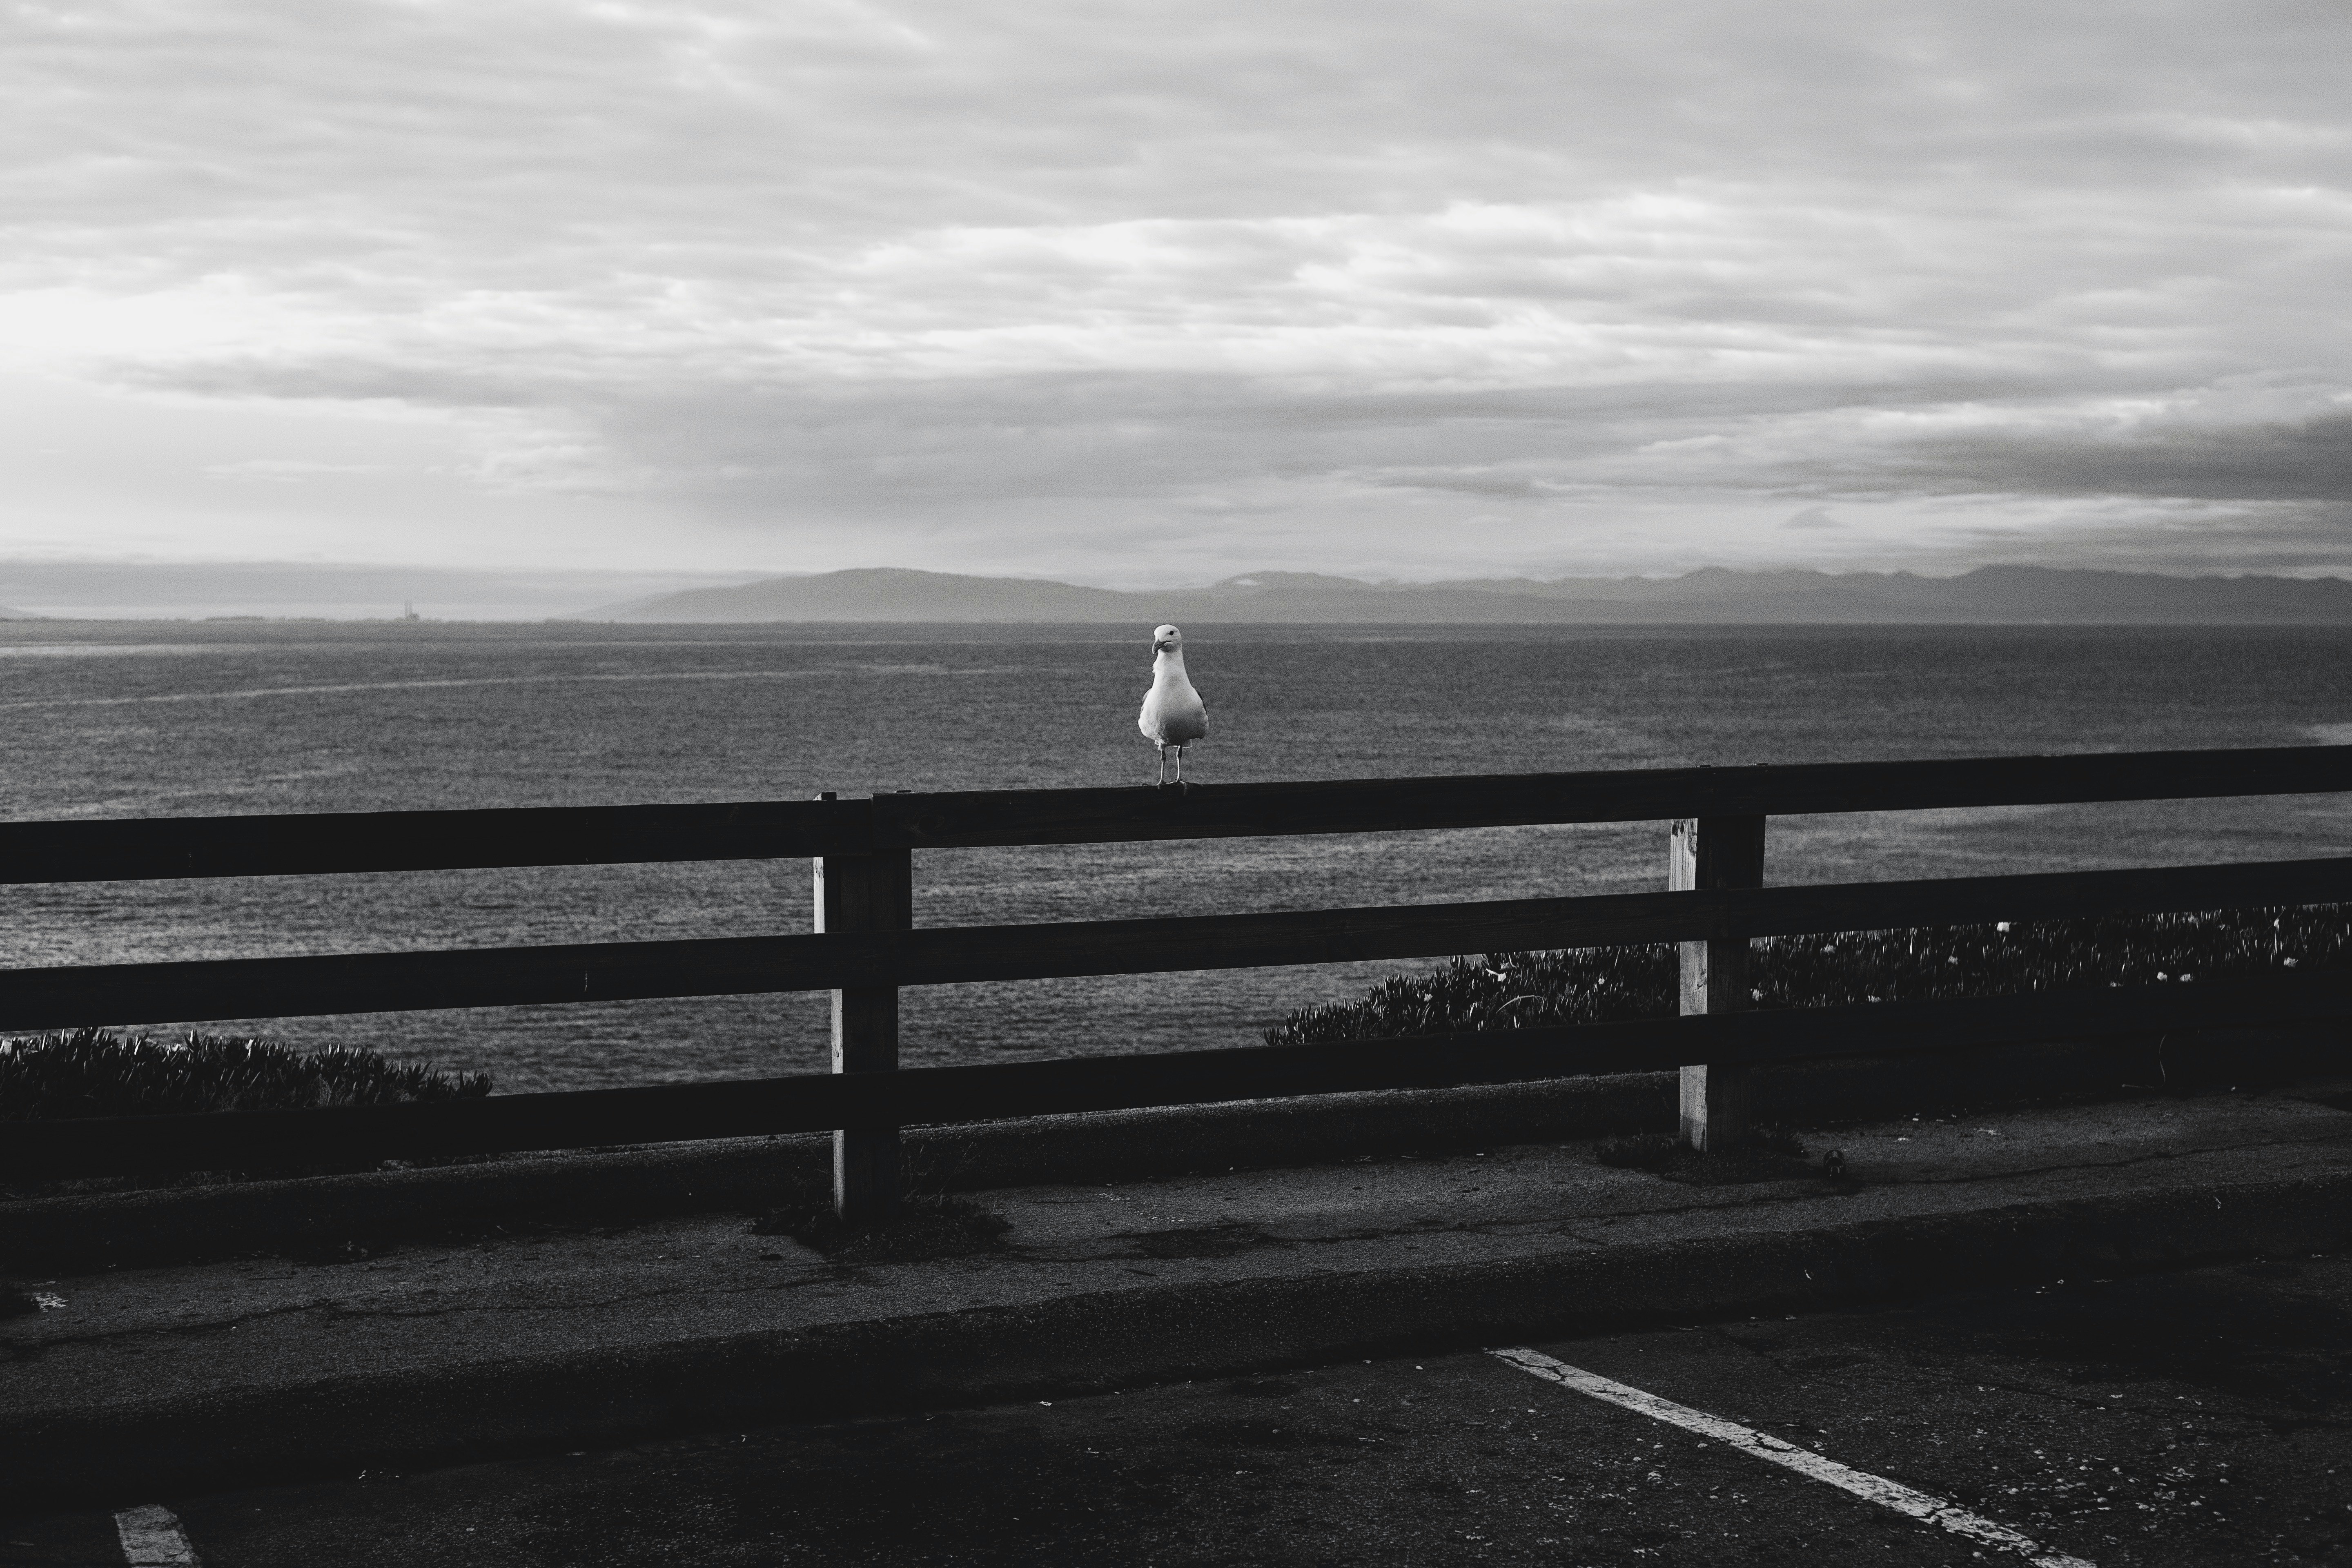 grayscale photo of a woman in white dress standing on a wooden fence